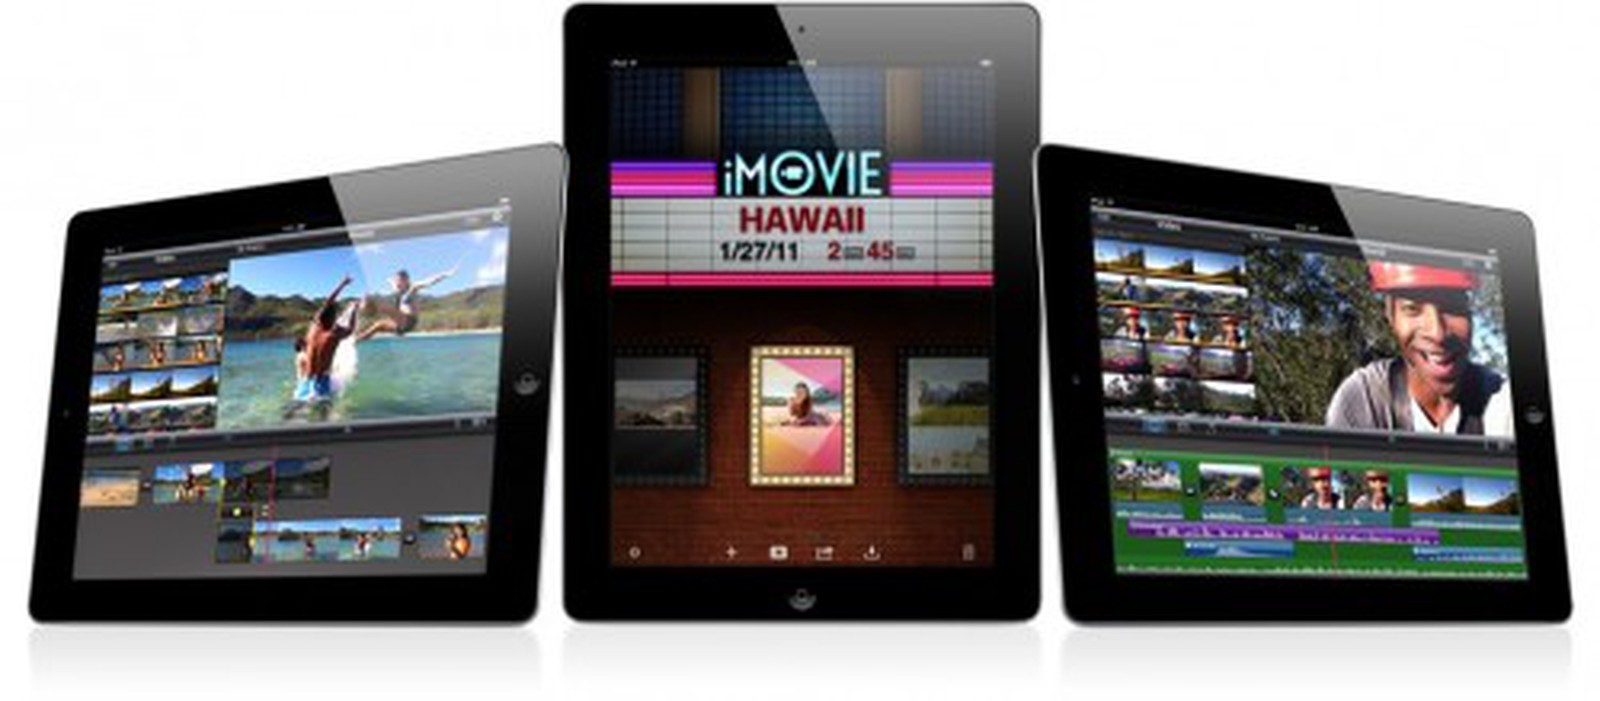 imovie picture in picture ipad